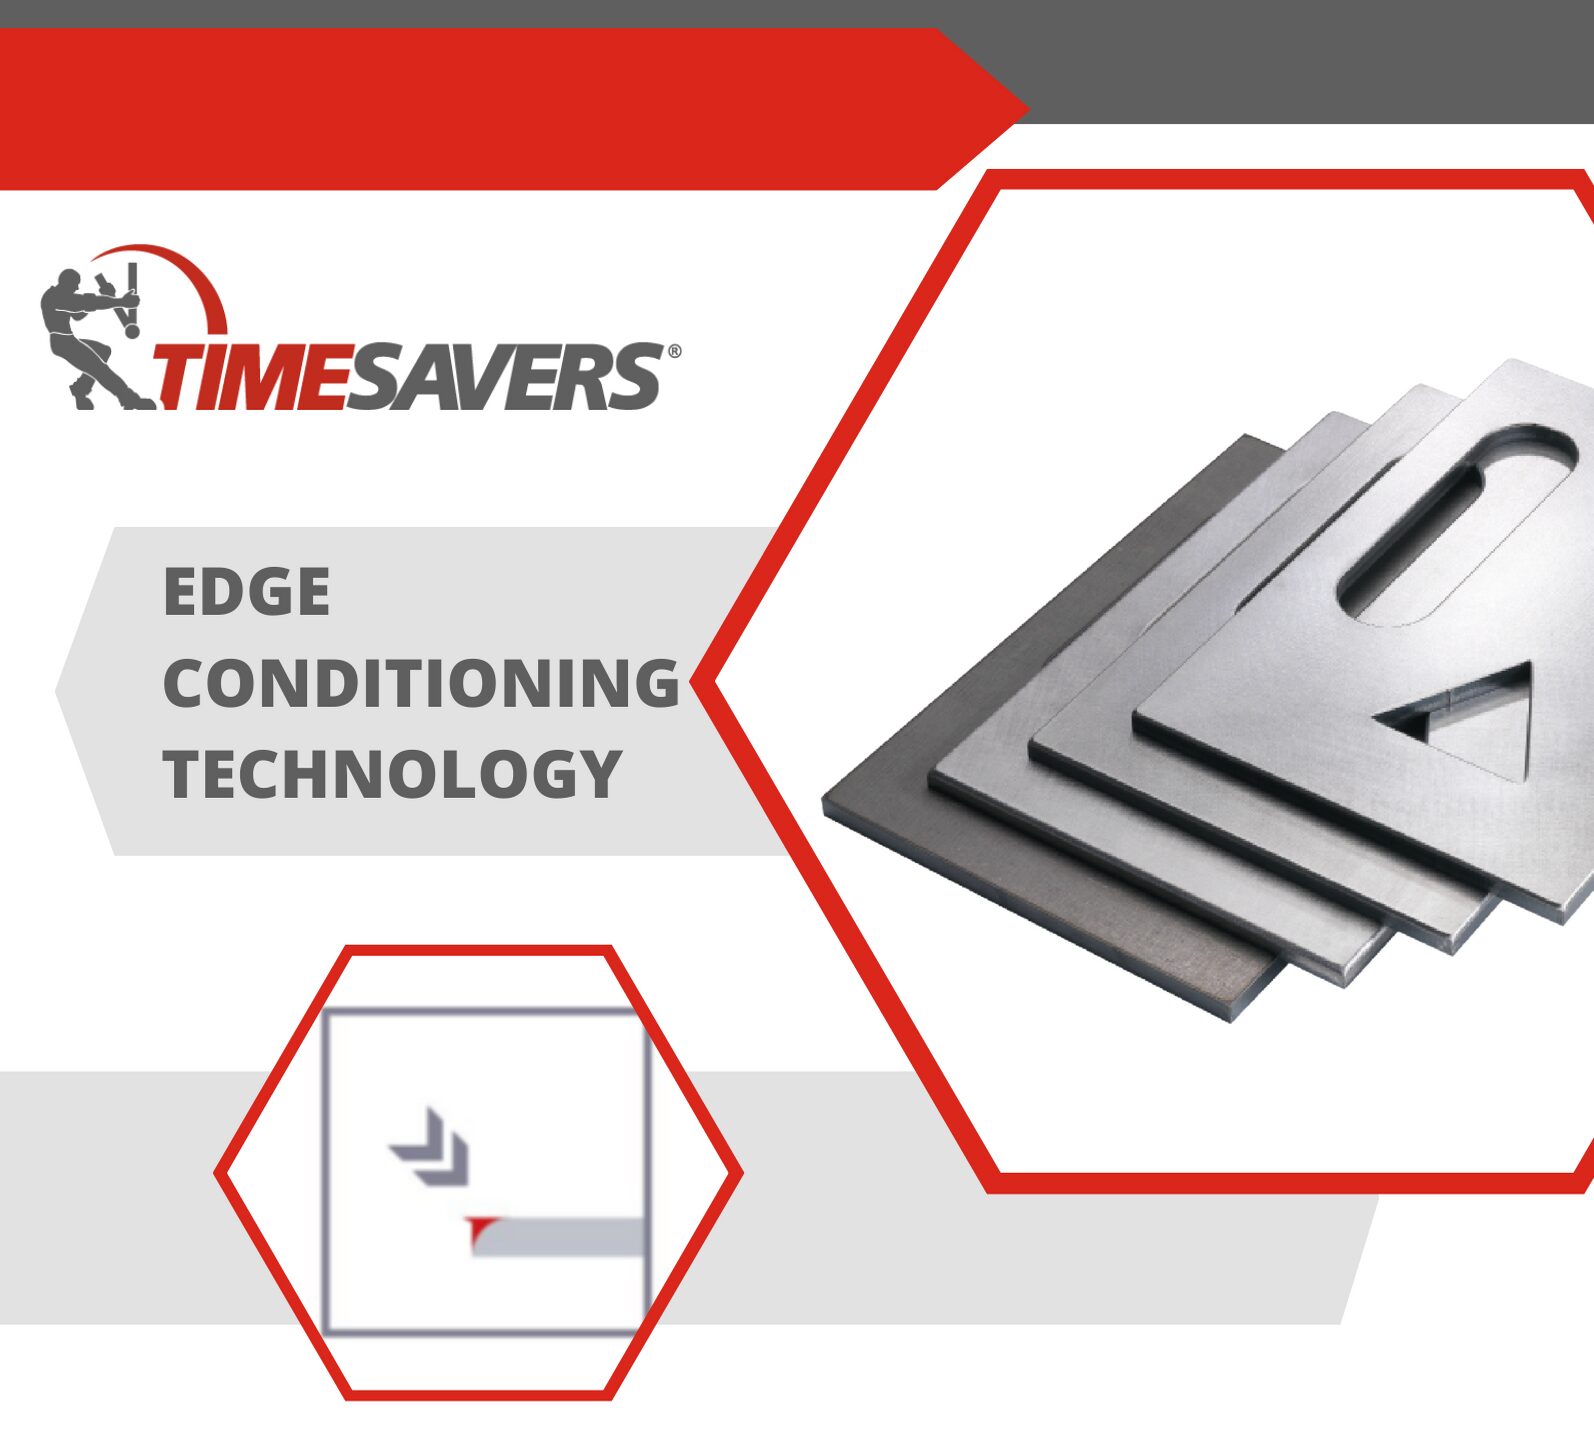 Timesavers Edge Conditioning Technology